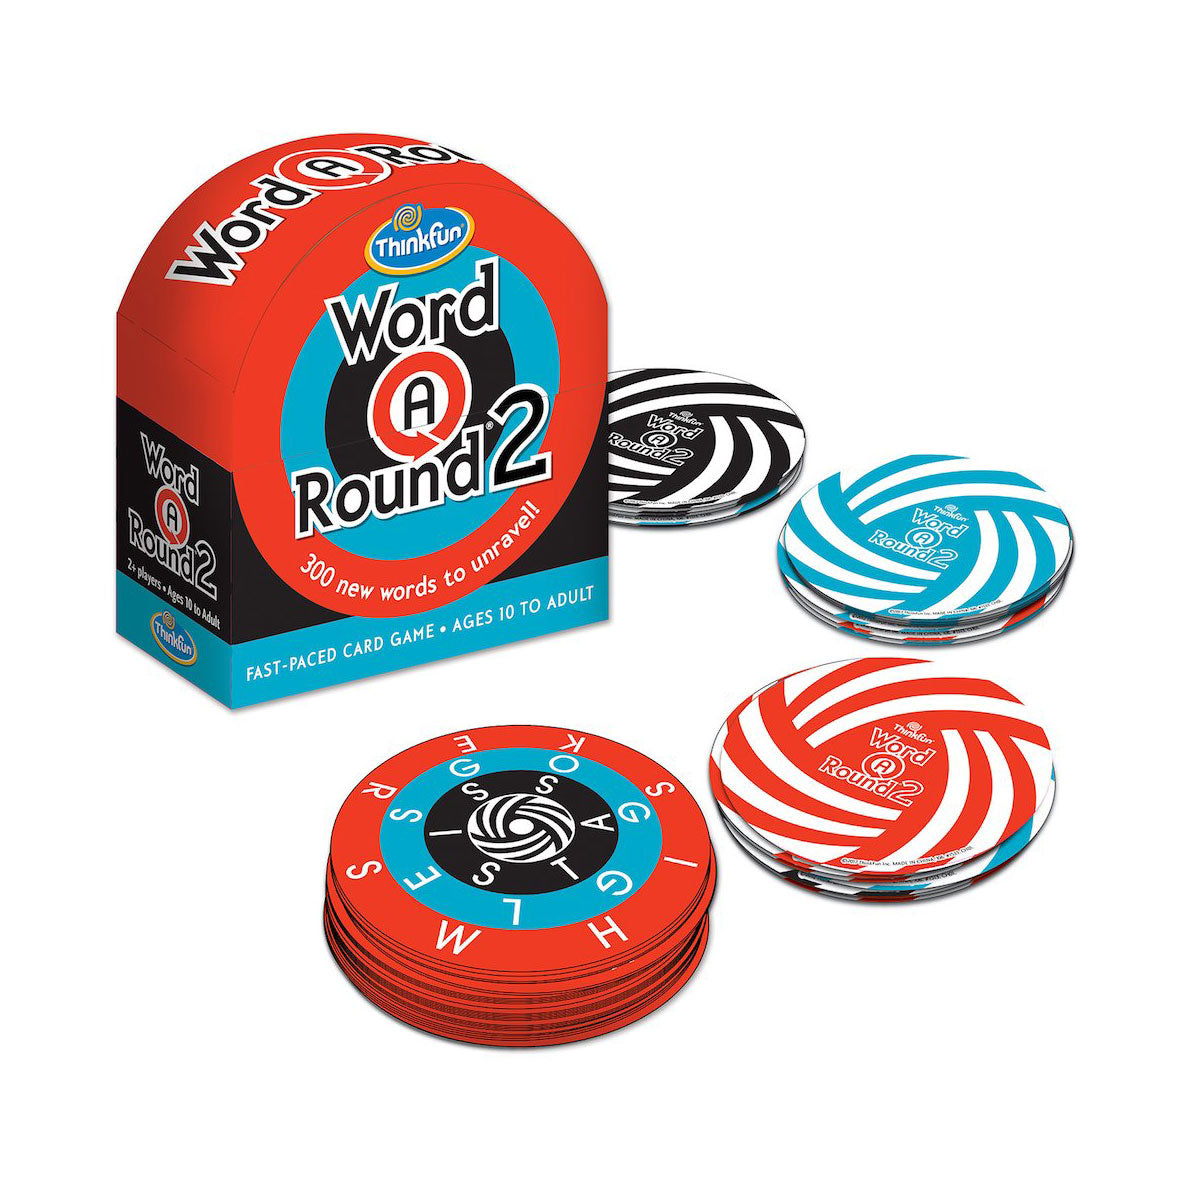 Word-A-Round 2 from ThinkFun